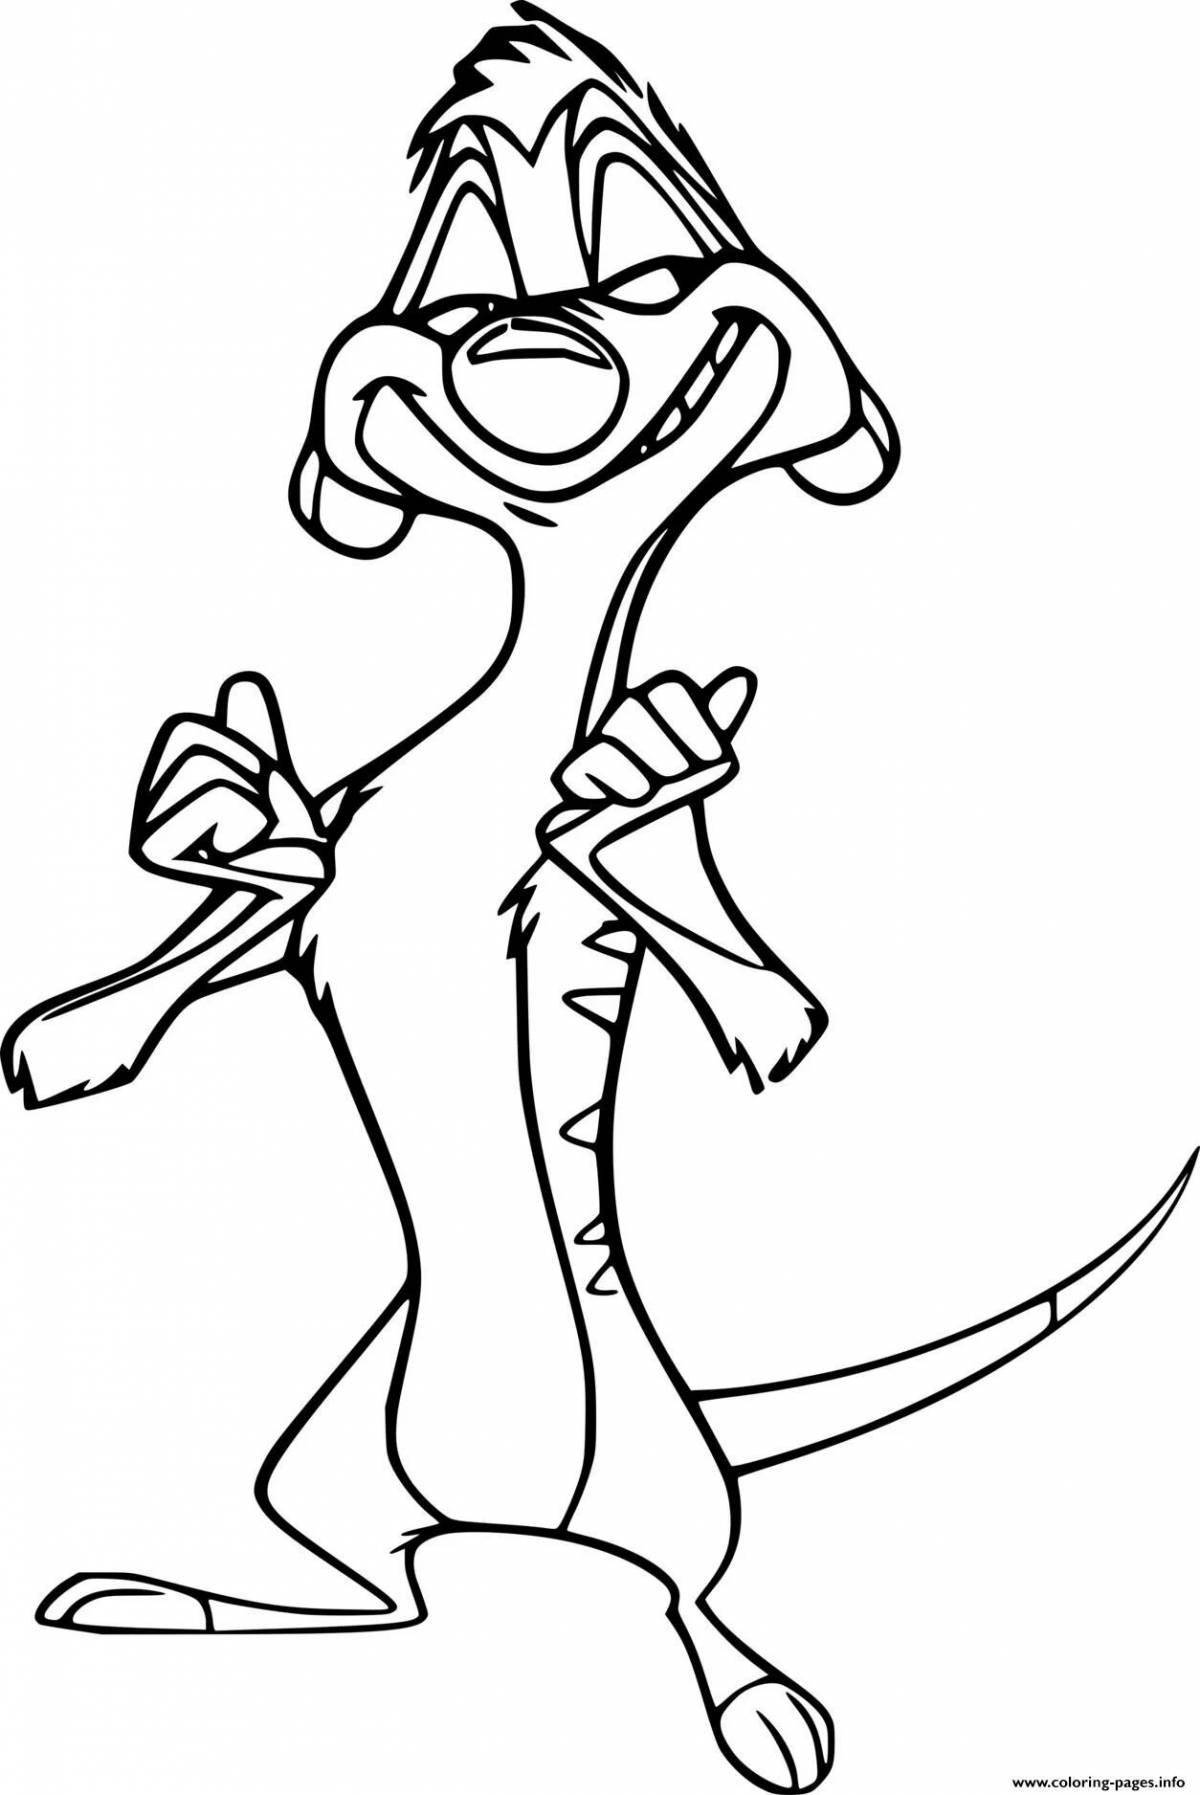 Glorious timon coloring page